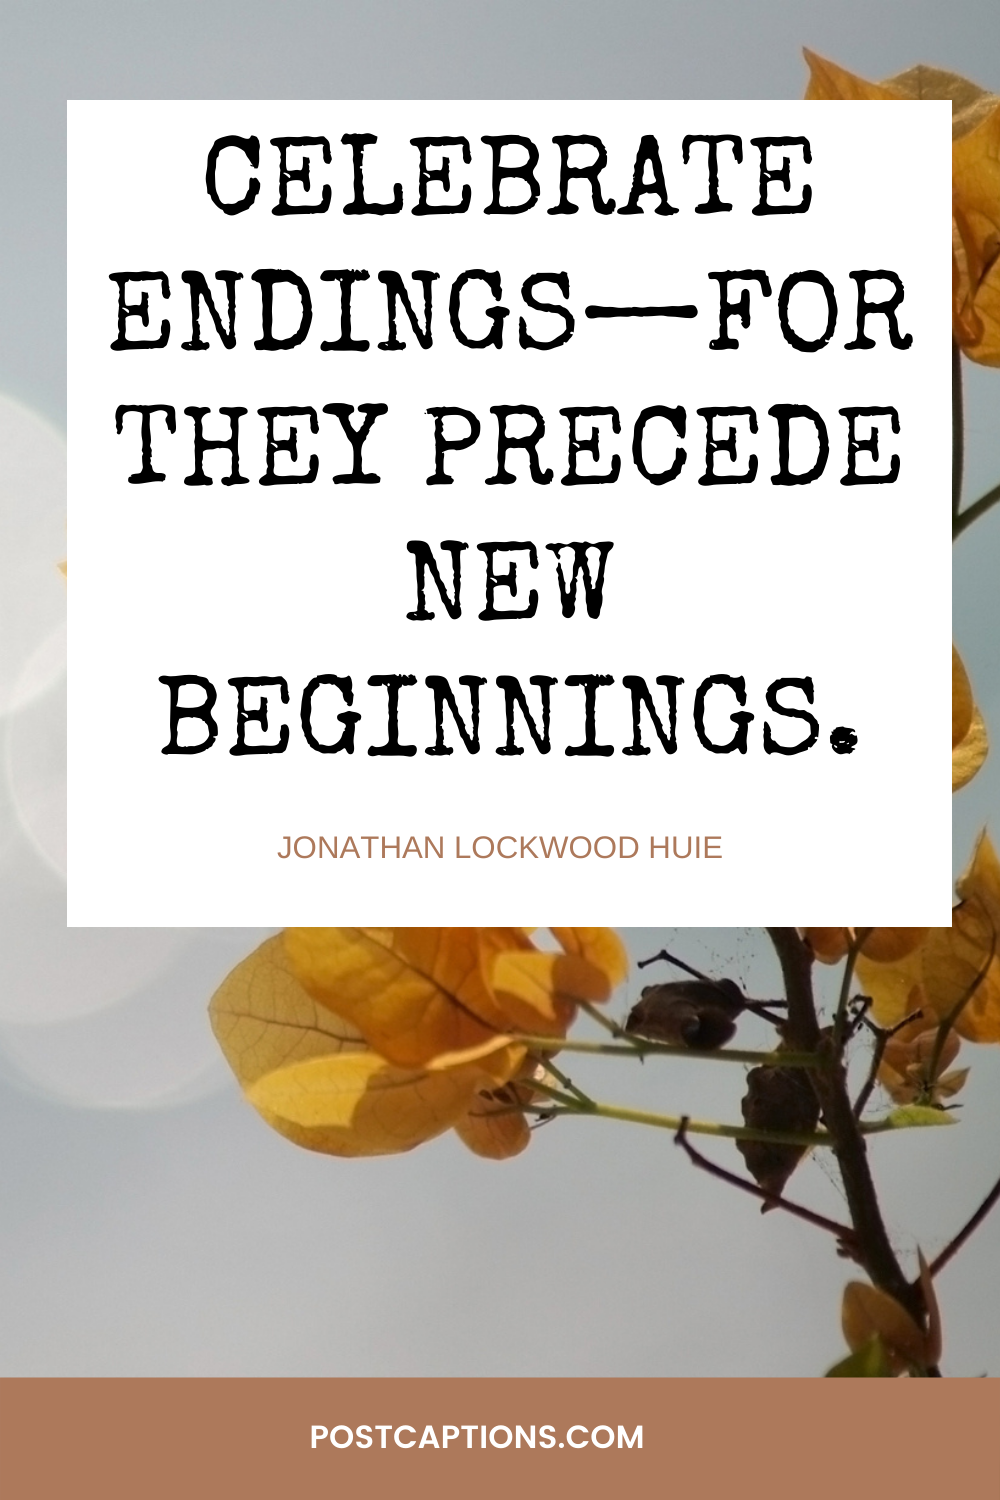 New beginnings quotes for Instagram